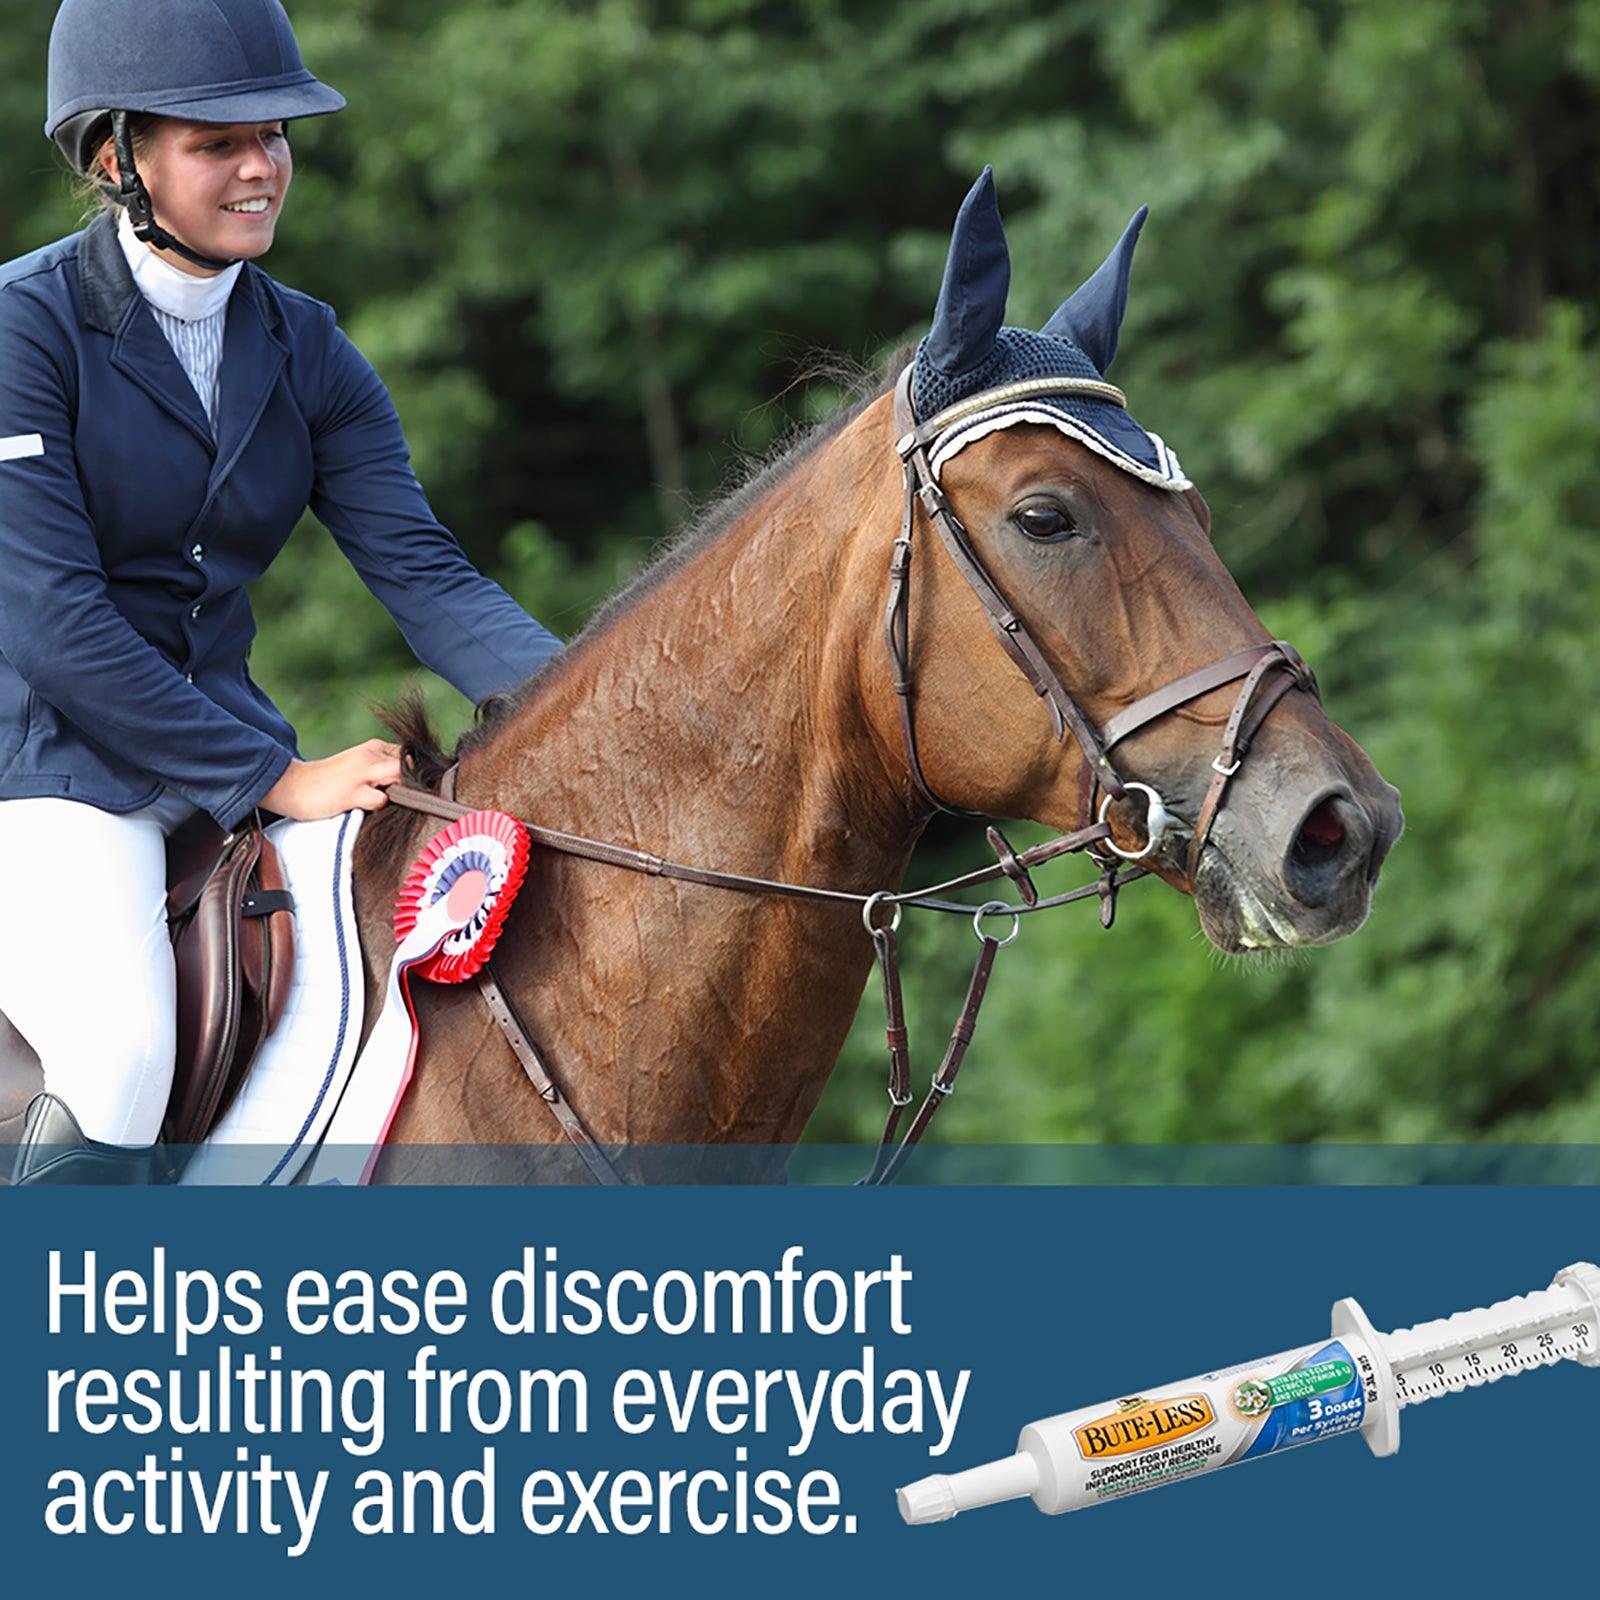 Woman riding a horse with a ribbon on its halter. Bute-less supplement helps ease discomfort resulting from everyday activity and exercise. 